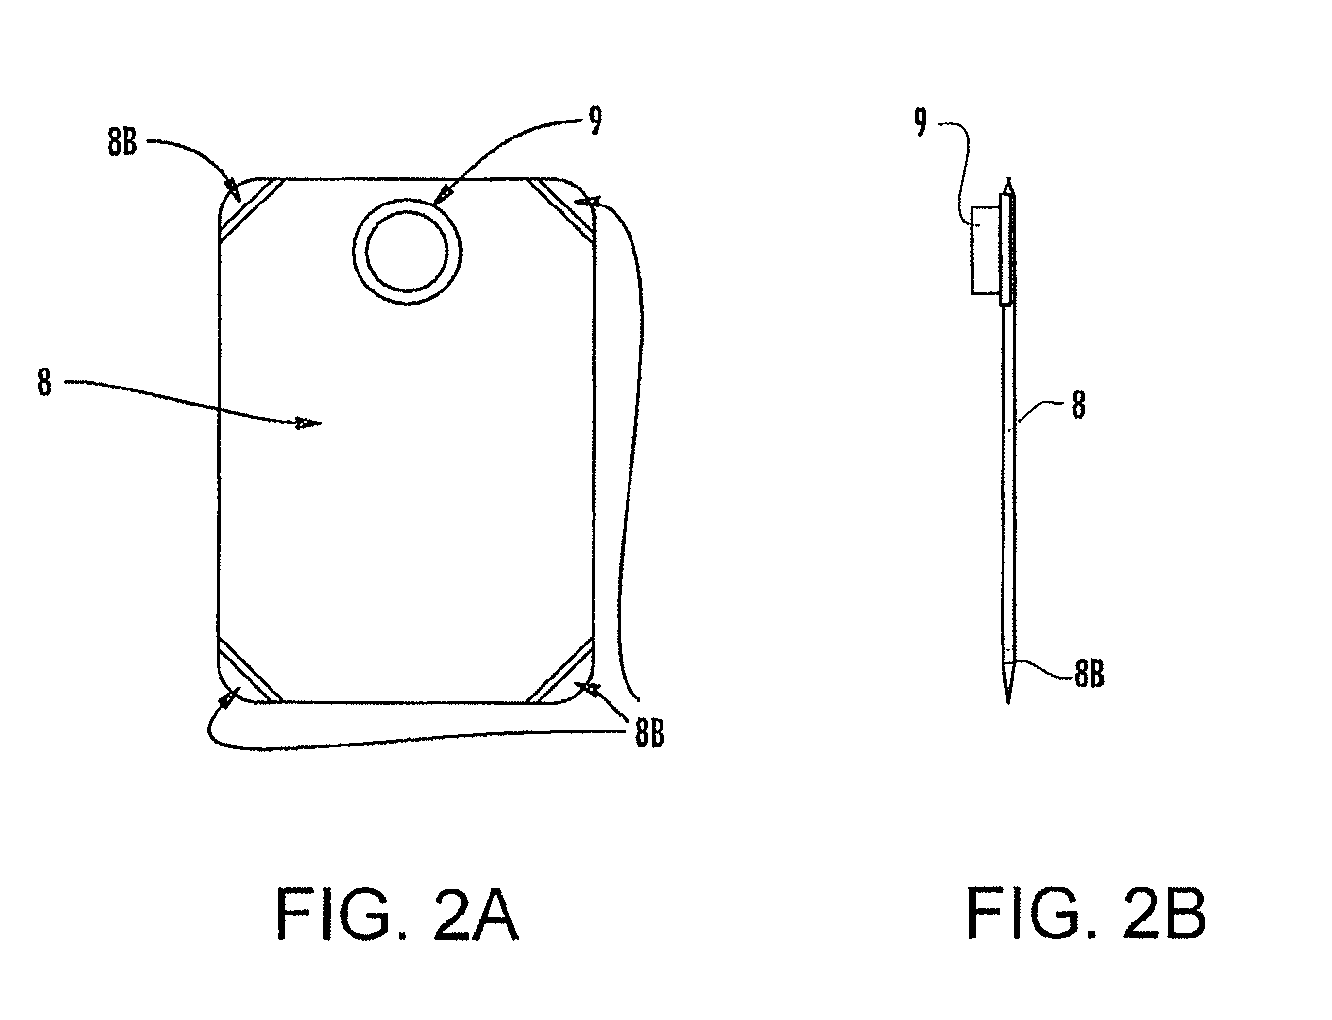 Methodology and apparatus for storing and dispensing liquid components to create custom formulations